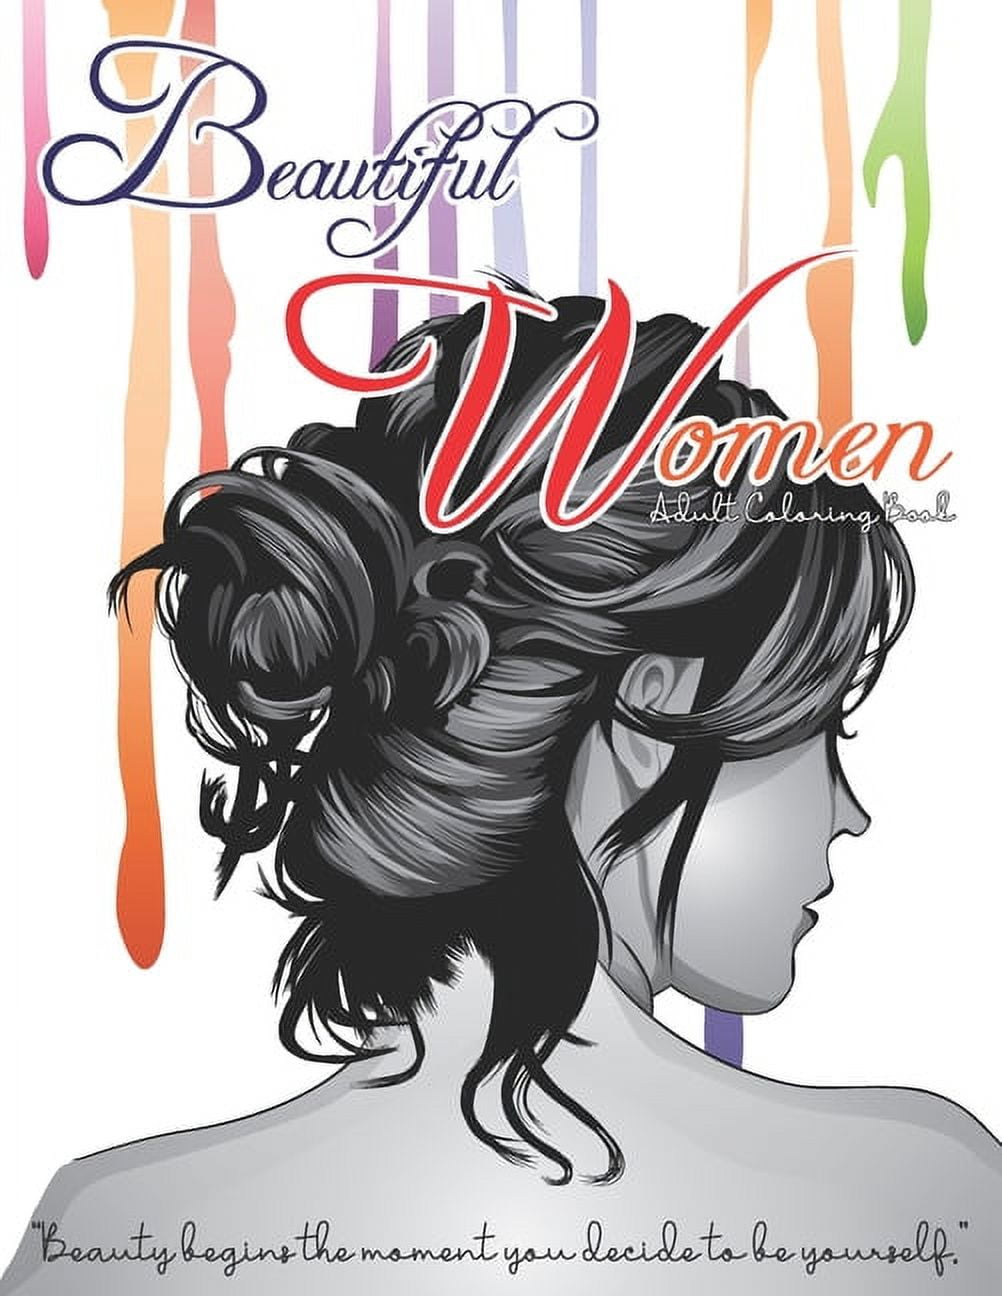 Adult Coloring Books for Women Volume 3: ADULT COLORING BOOKS FOR WOMEN VOLUME 3 is Great for Relaxing Your Mind by Coloring Your Thoughts and is Very Therapeutic for Yourself that You Can Enjoy Coloring Anywhere [Book]